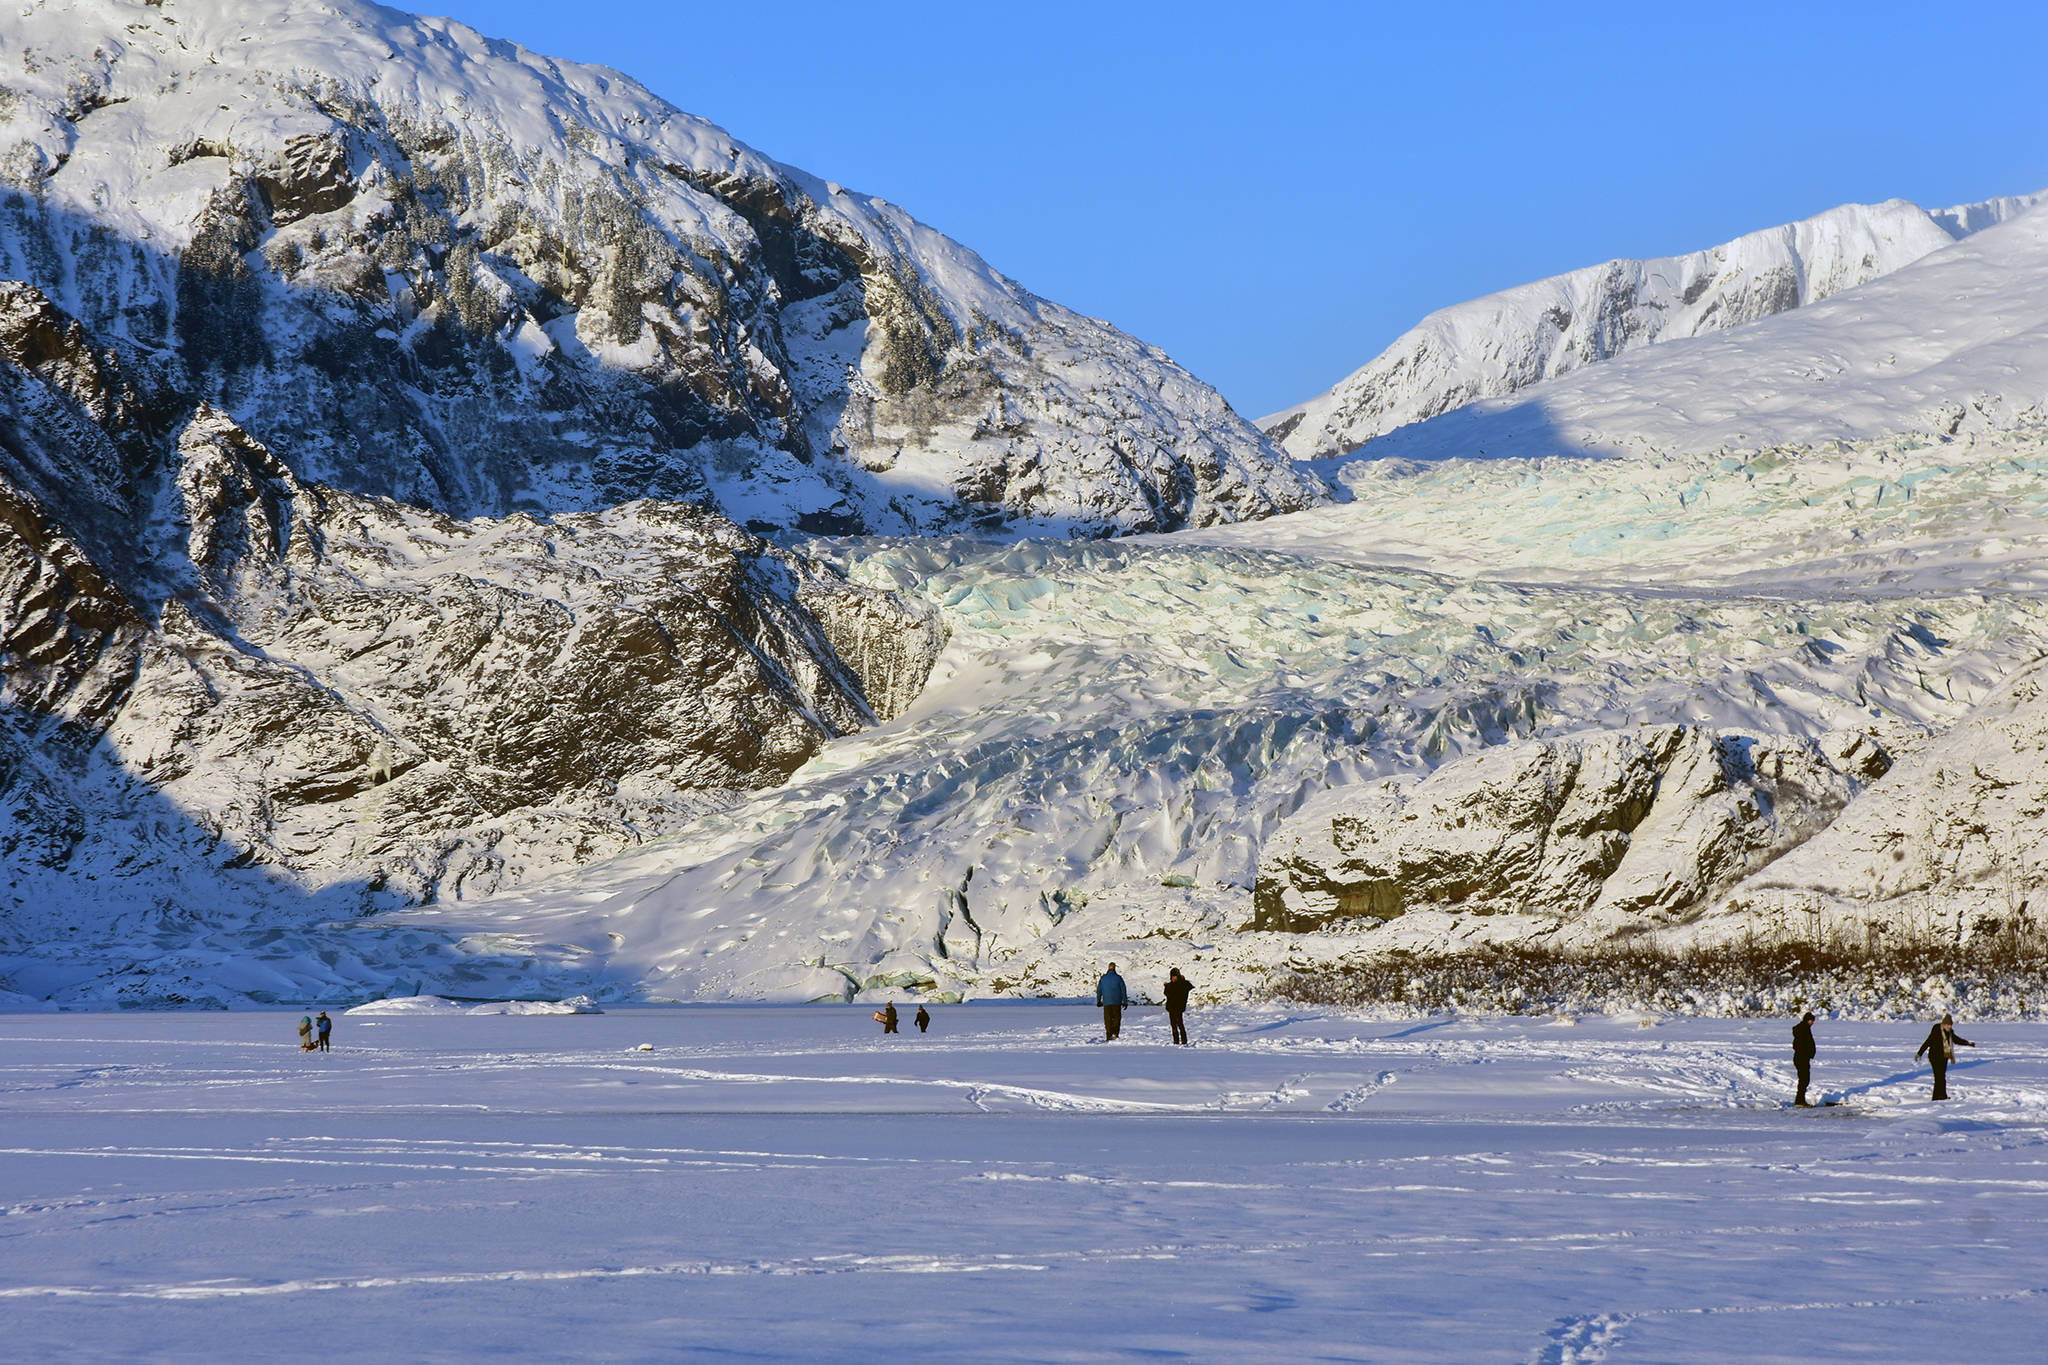 People walk on the ice at Mendenhall Lake, Saturday, Jan. 11. Despite a recent cold spell, the ice is not yet thick enough to support people in some spots. The U.S. Forest Service and Capital City Fire/Rescue both advise staying off the ice. (Peter Segall | Juneau Empire)